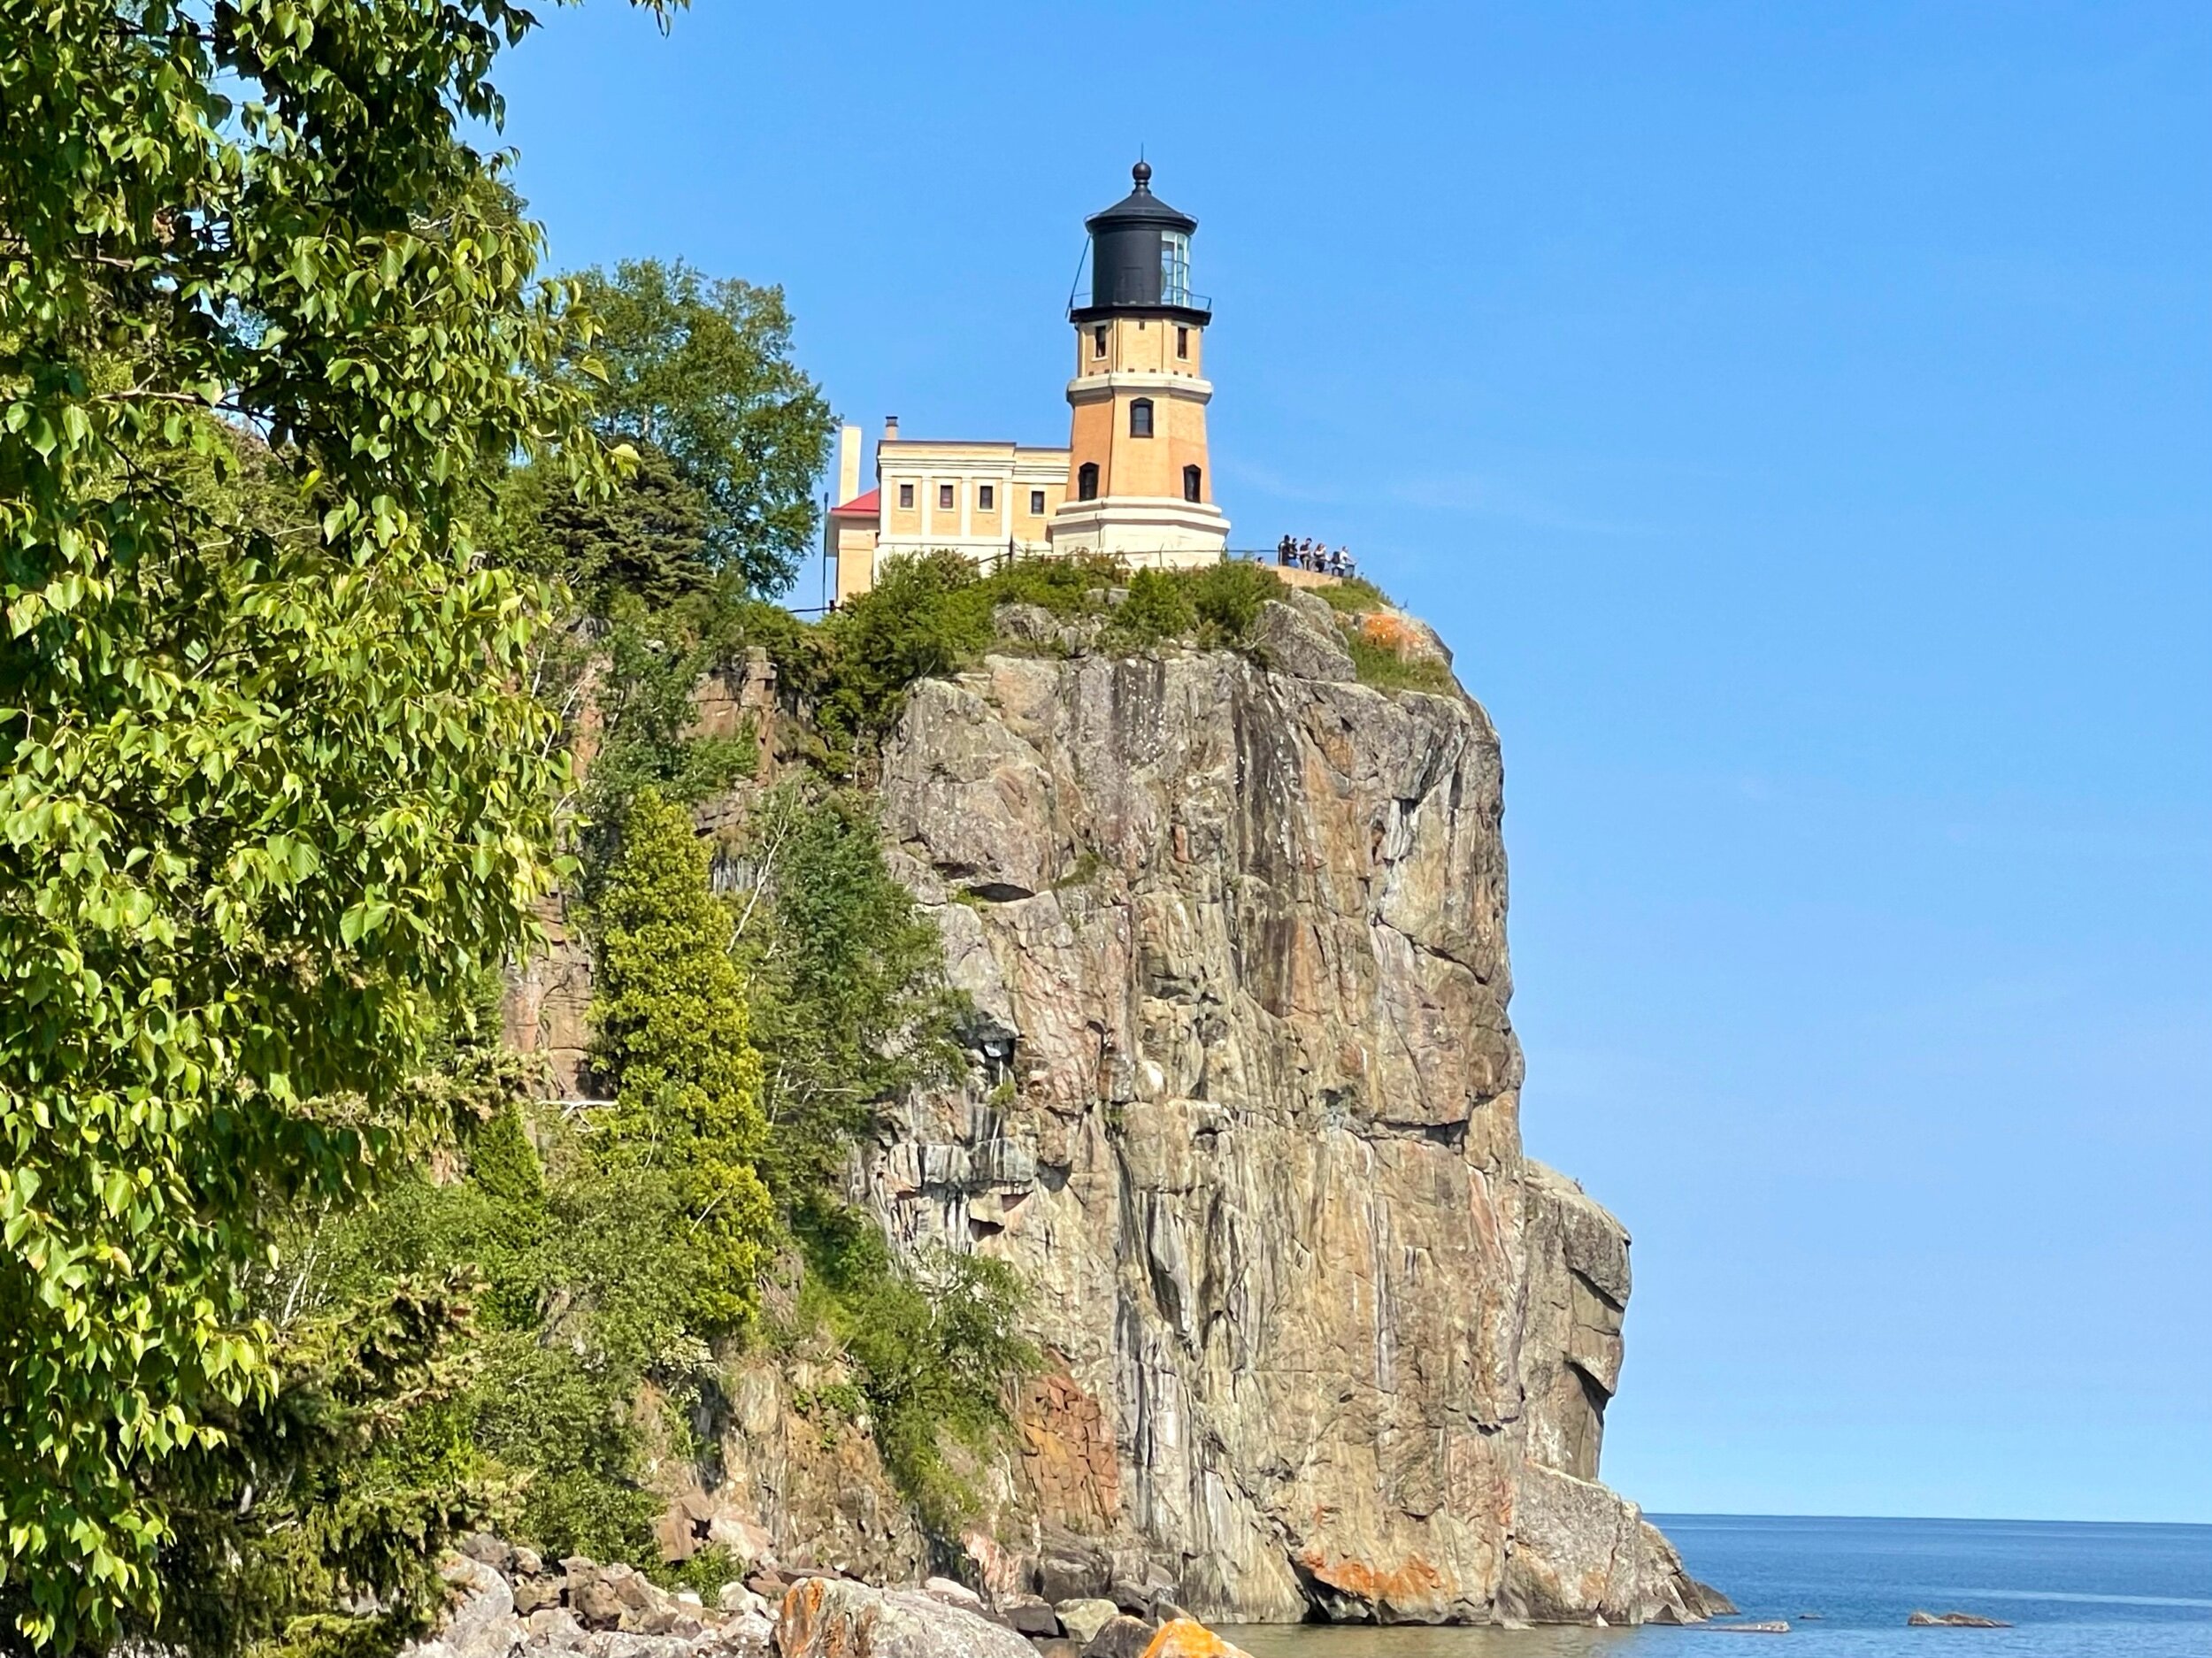   Split Rock Lighthouse  along the North Shore was built specifically because of one storm in November 1905. During the storm, the temperature dropped to -13 degrees, winds were more than 60 mph and waves exceeded 30 feet. Twenty-nine ships wrecked, 